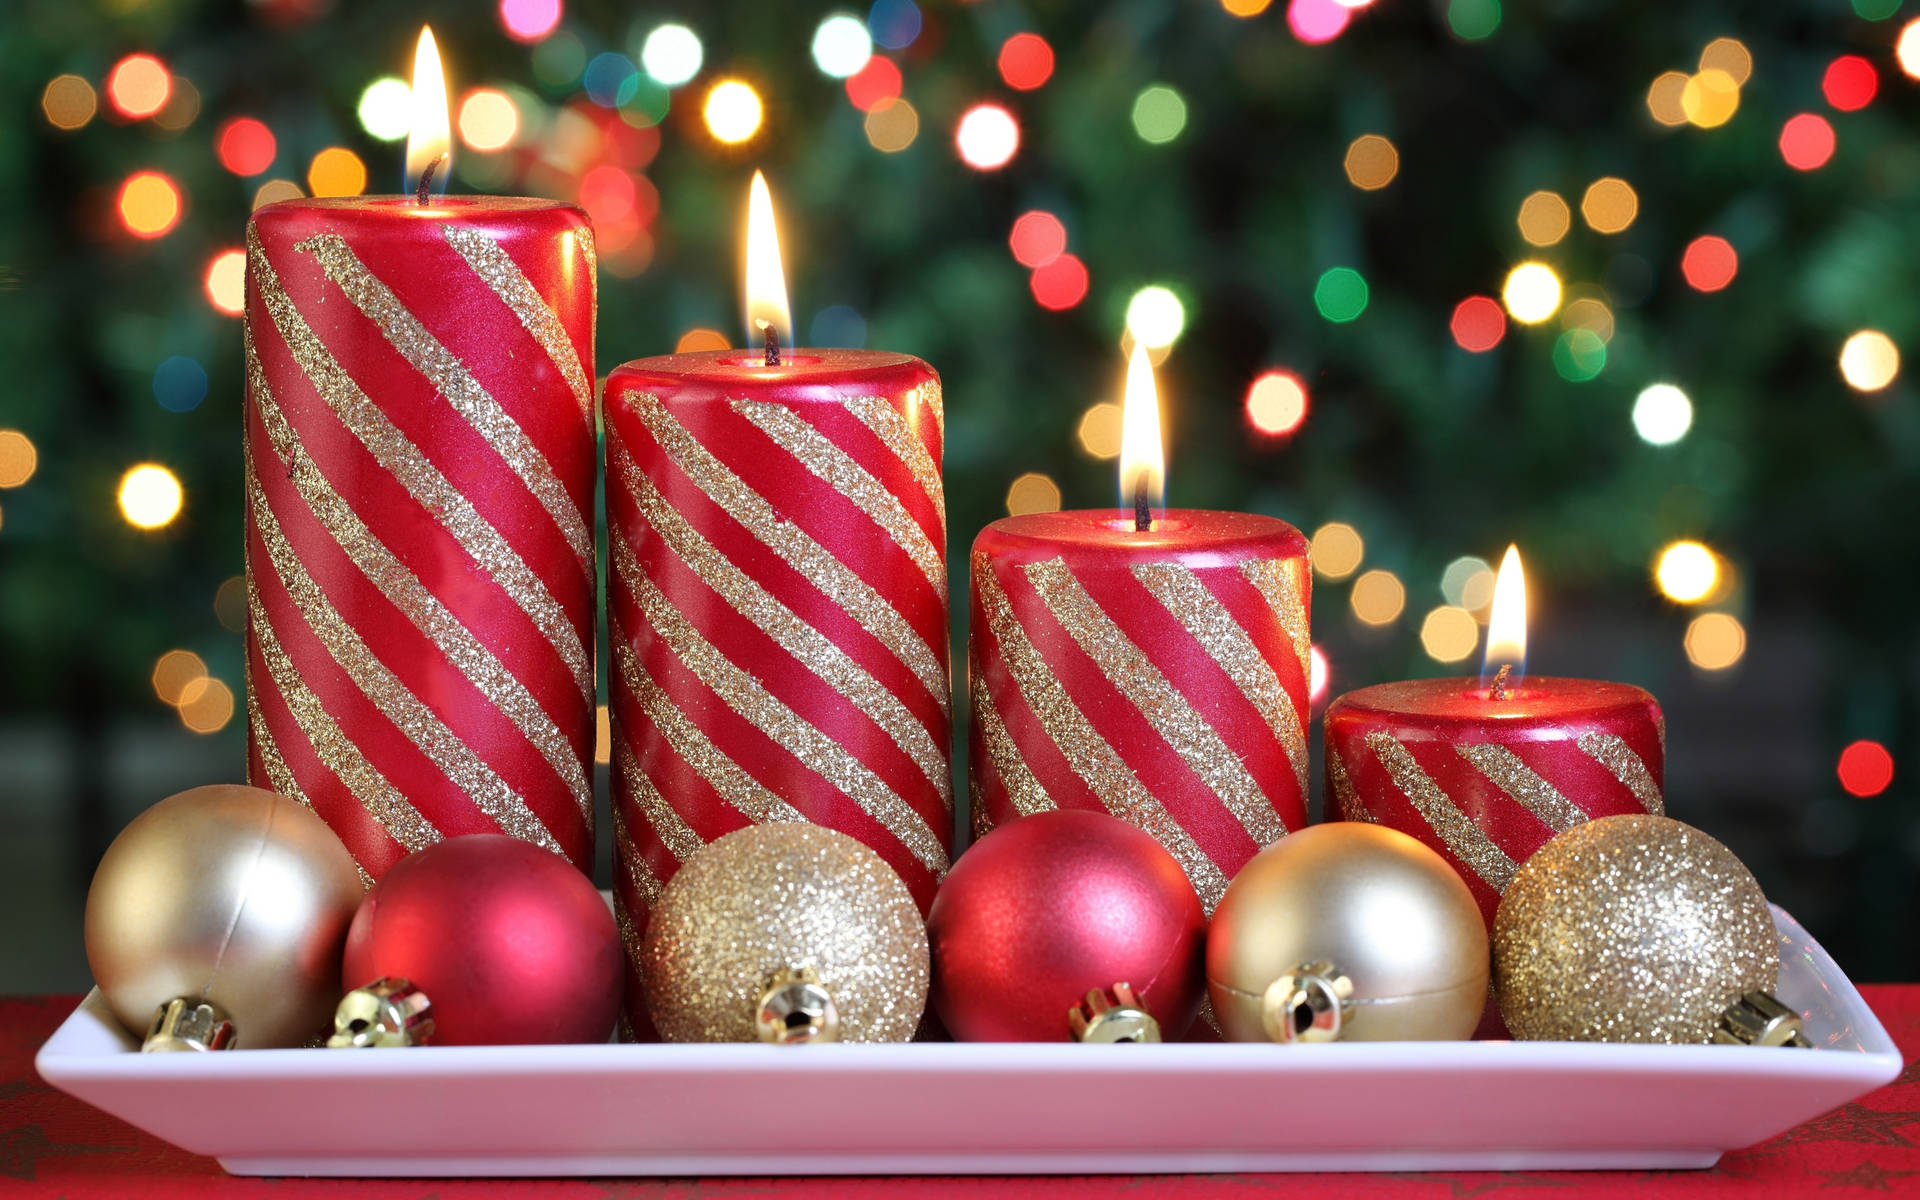 Merry Christmas Candles Wallpaper